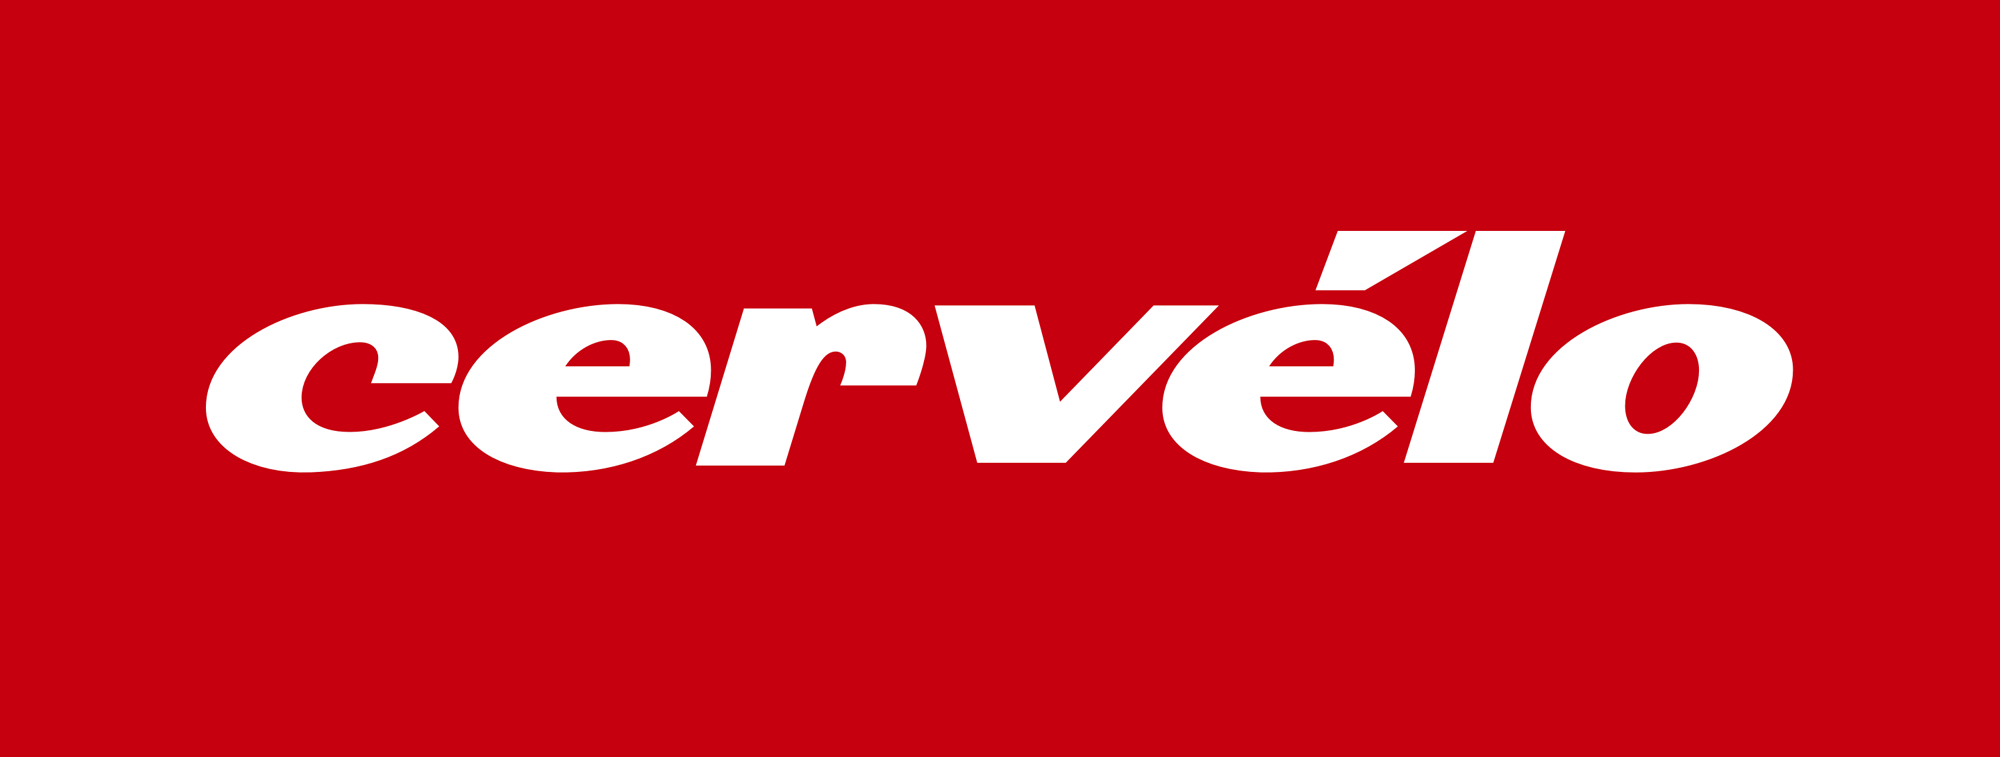 New Logo and Identity for Cervélo by Concrete